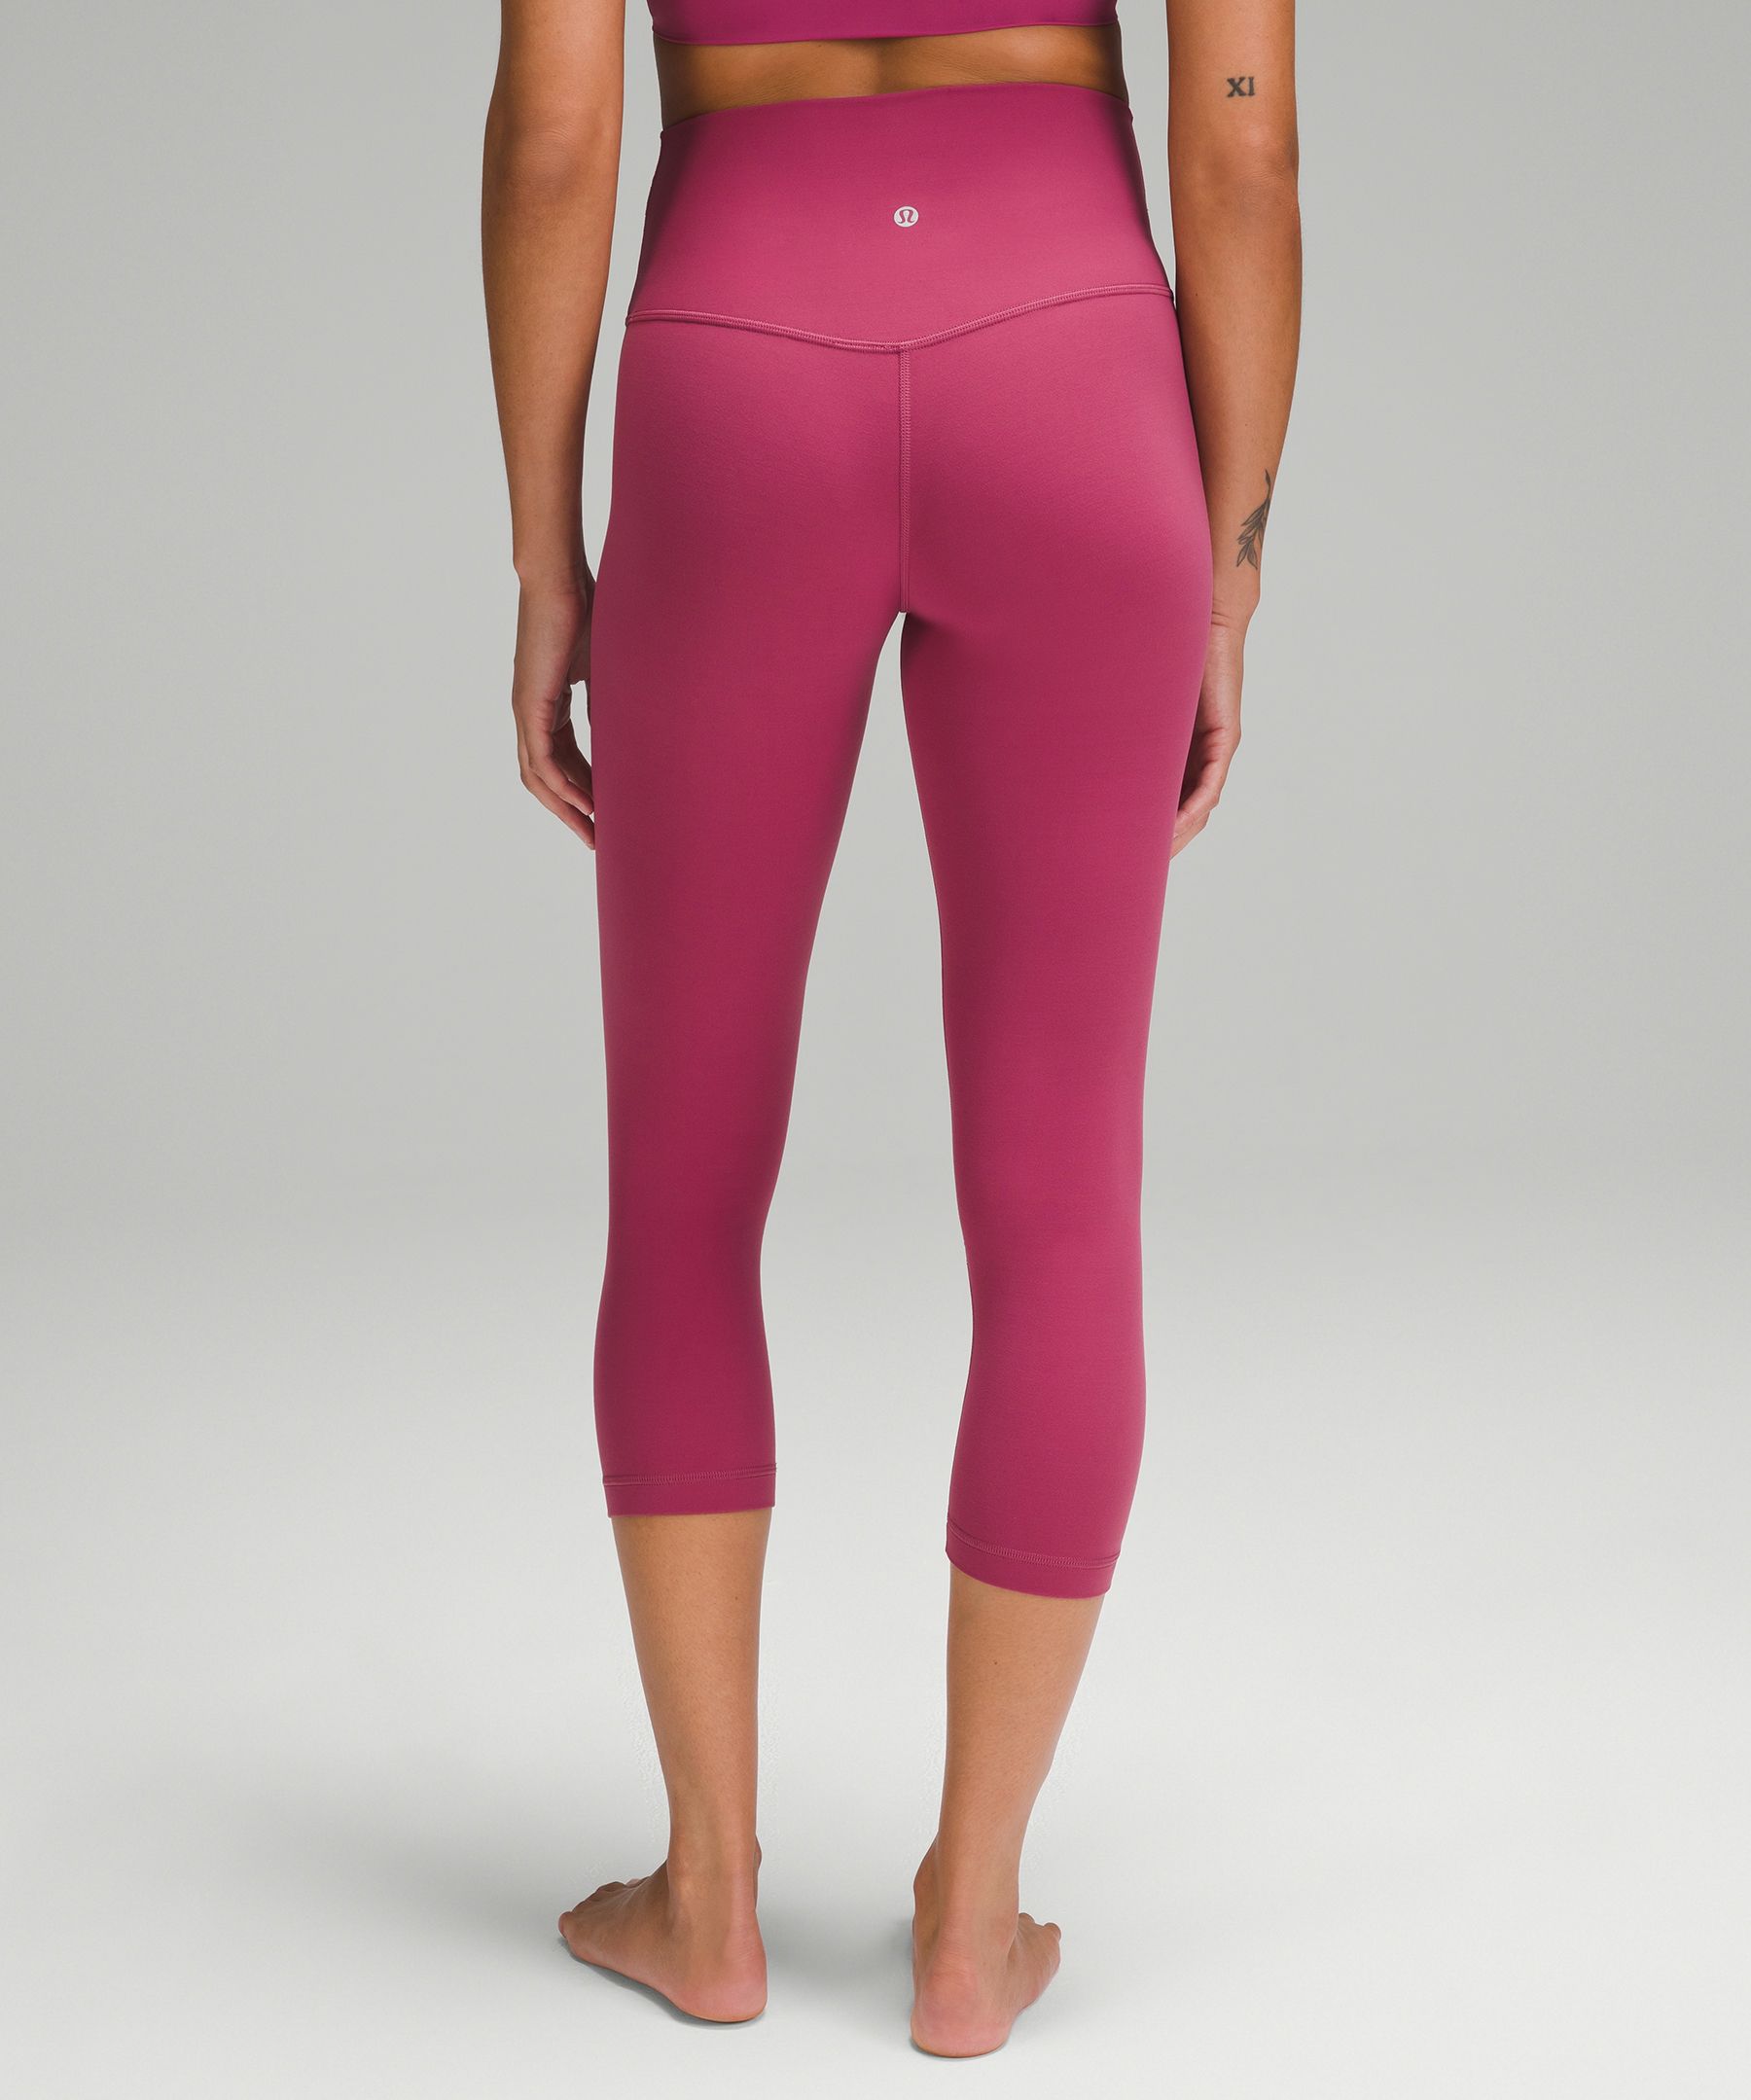 NWT | Lululemon Align High-Rise Crop 21 in Copper Brown Size 20